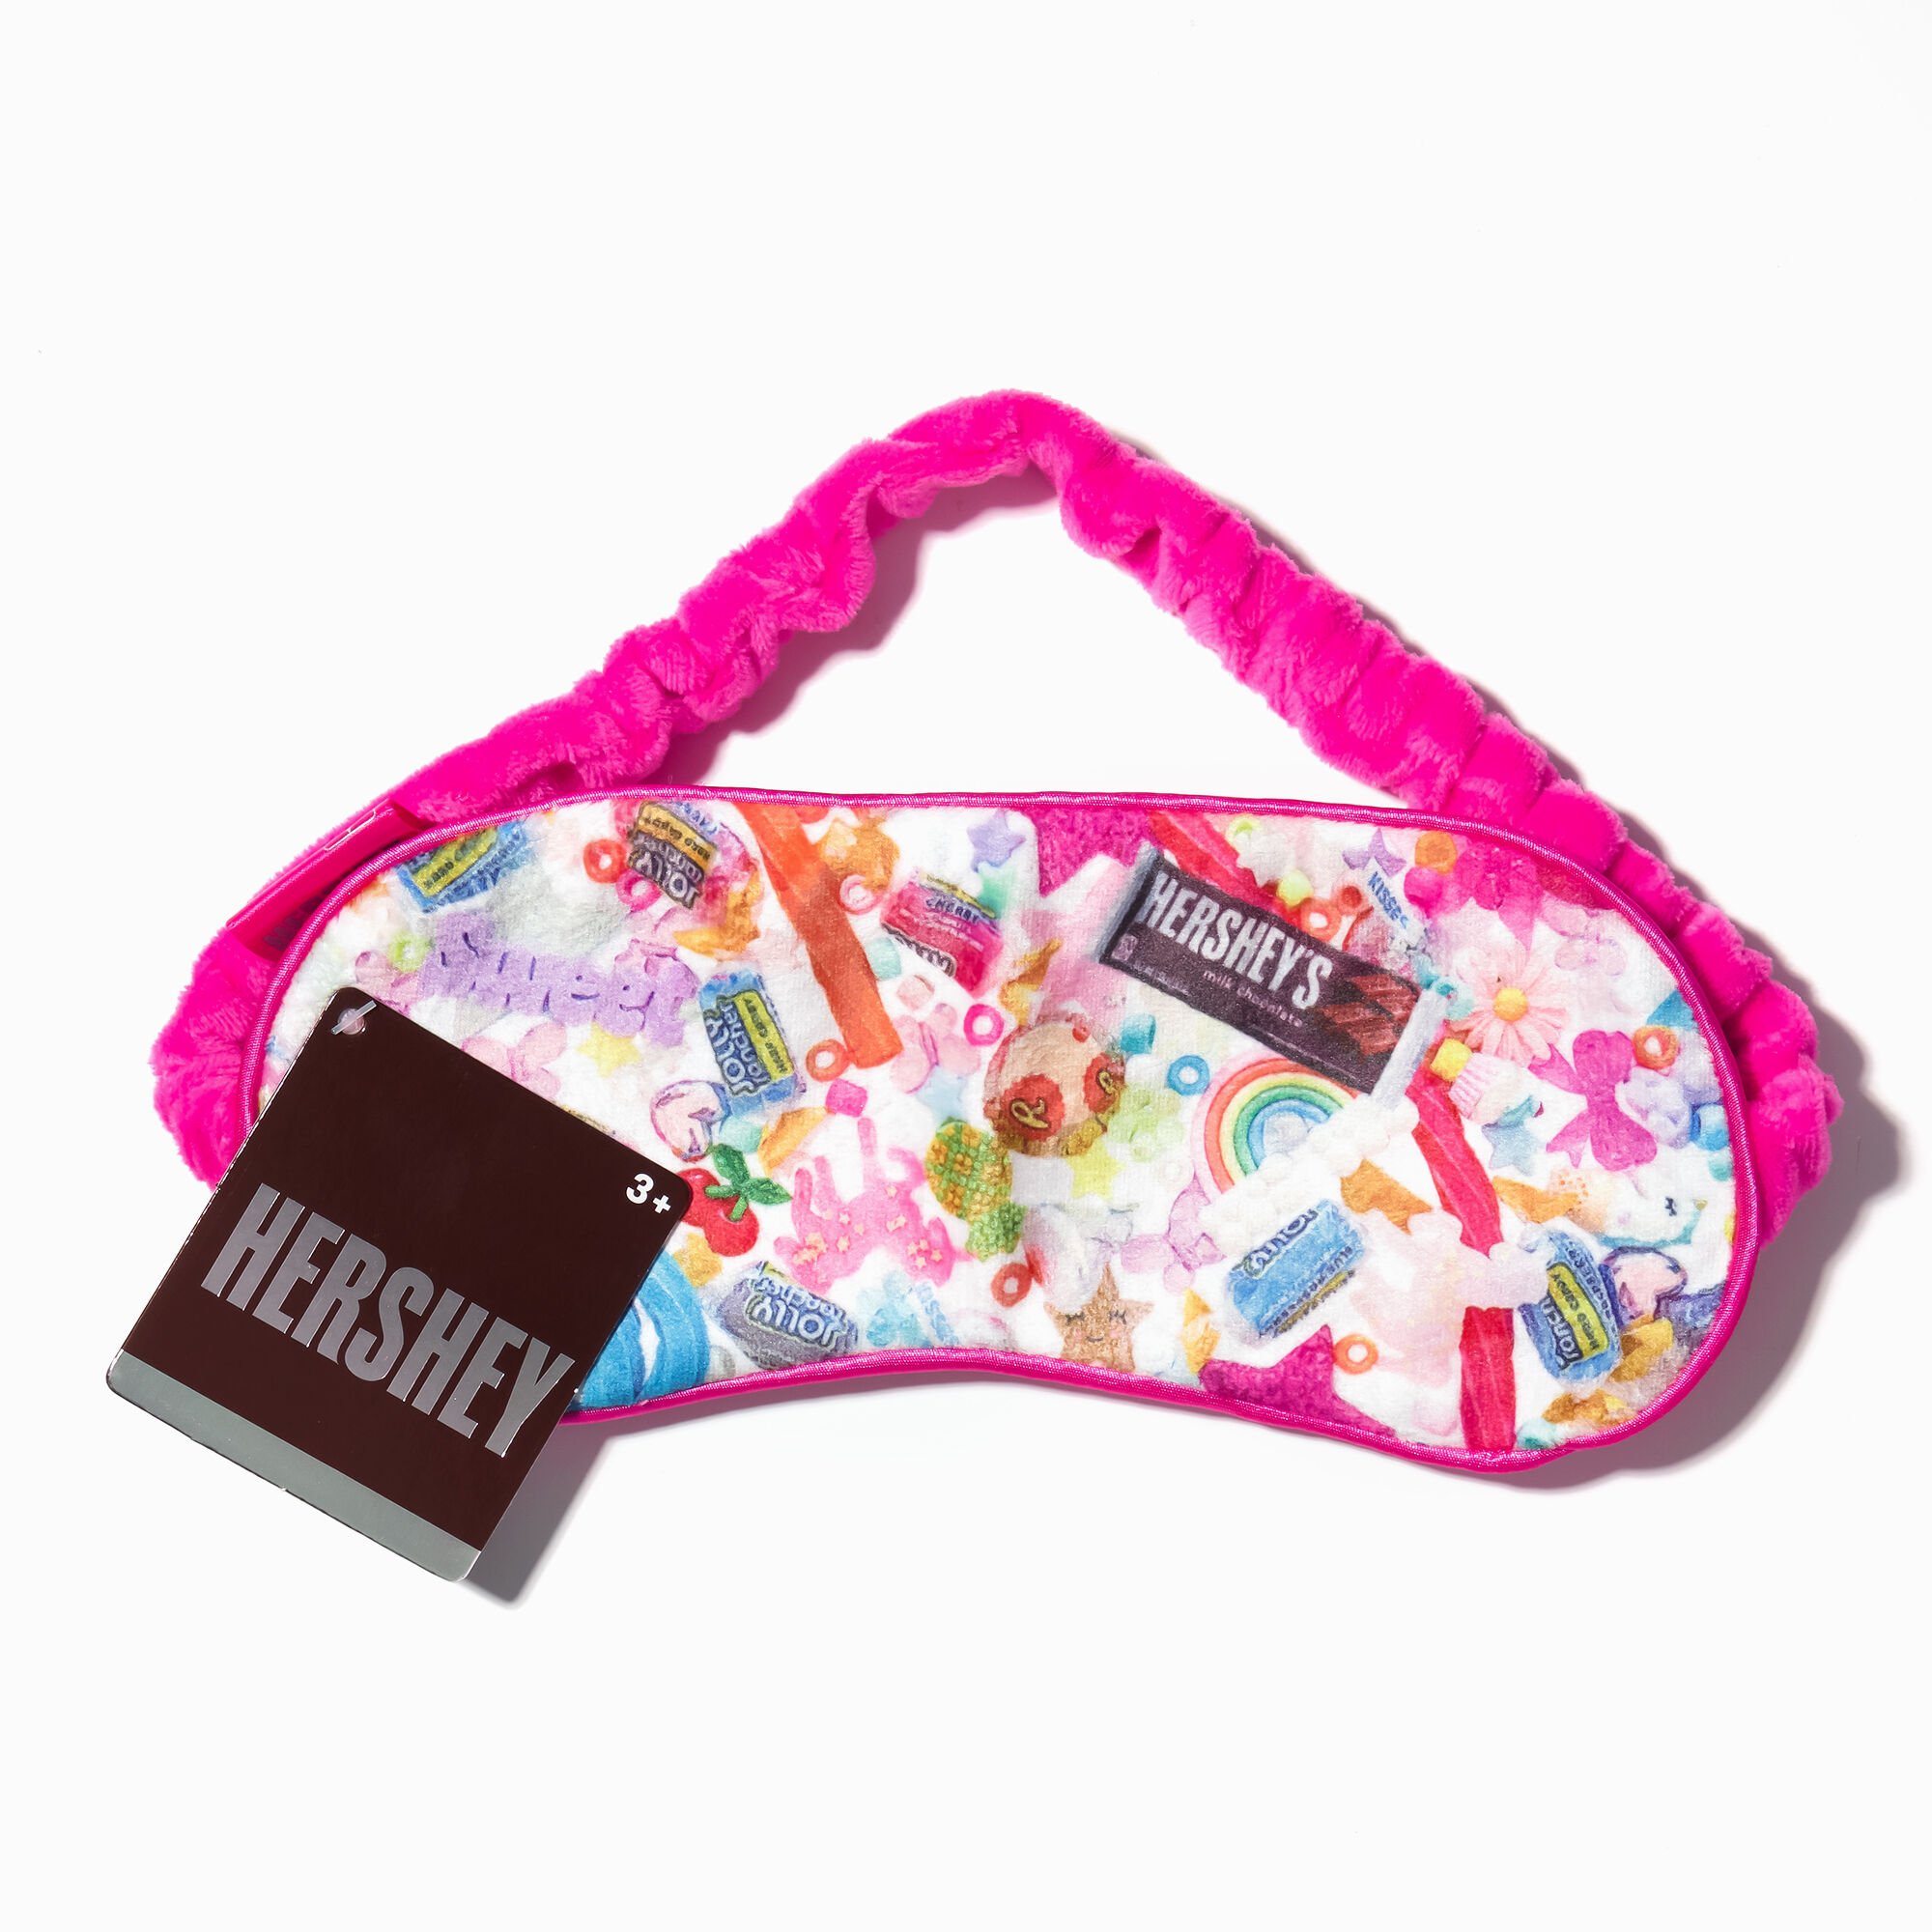 View Claires Hersheys Sweets Sleeping Mask information